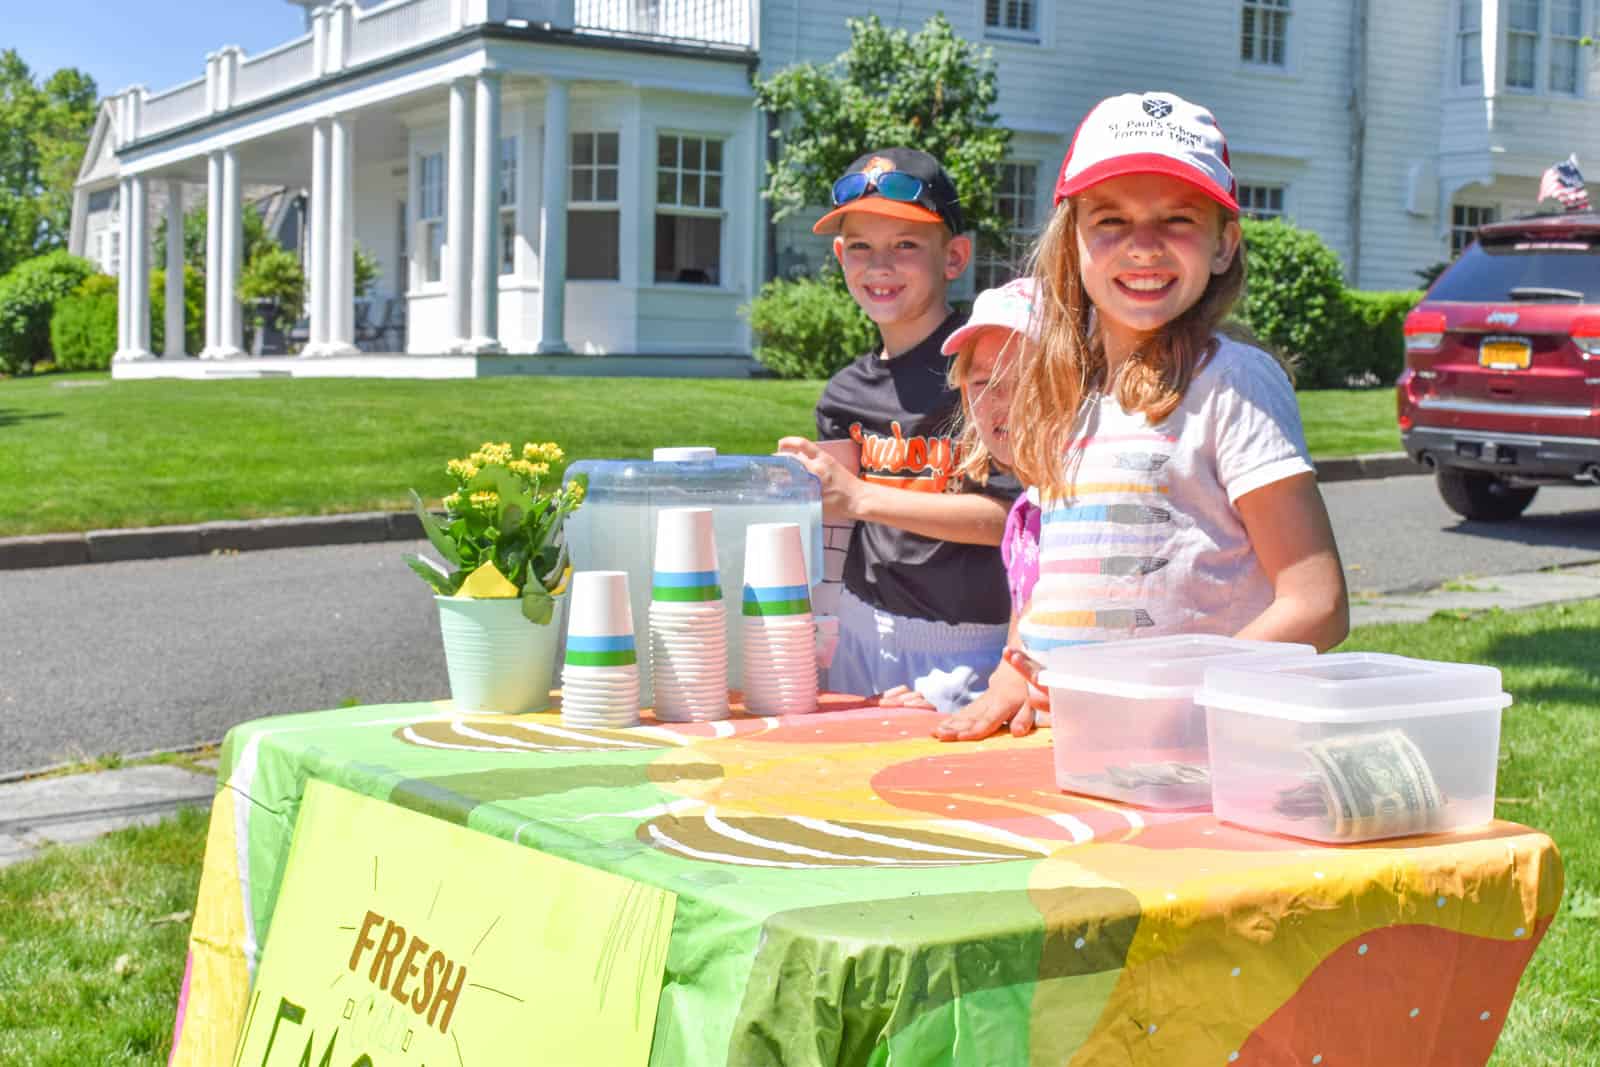 setting up a great lemonade stand